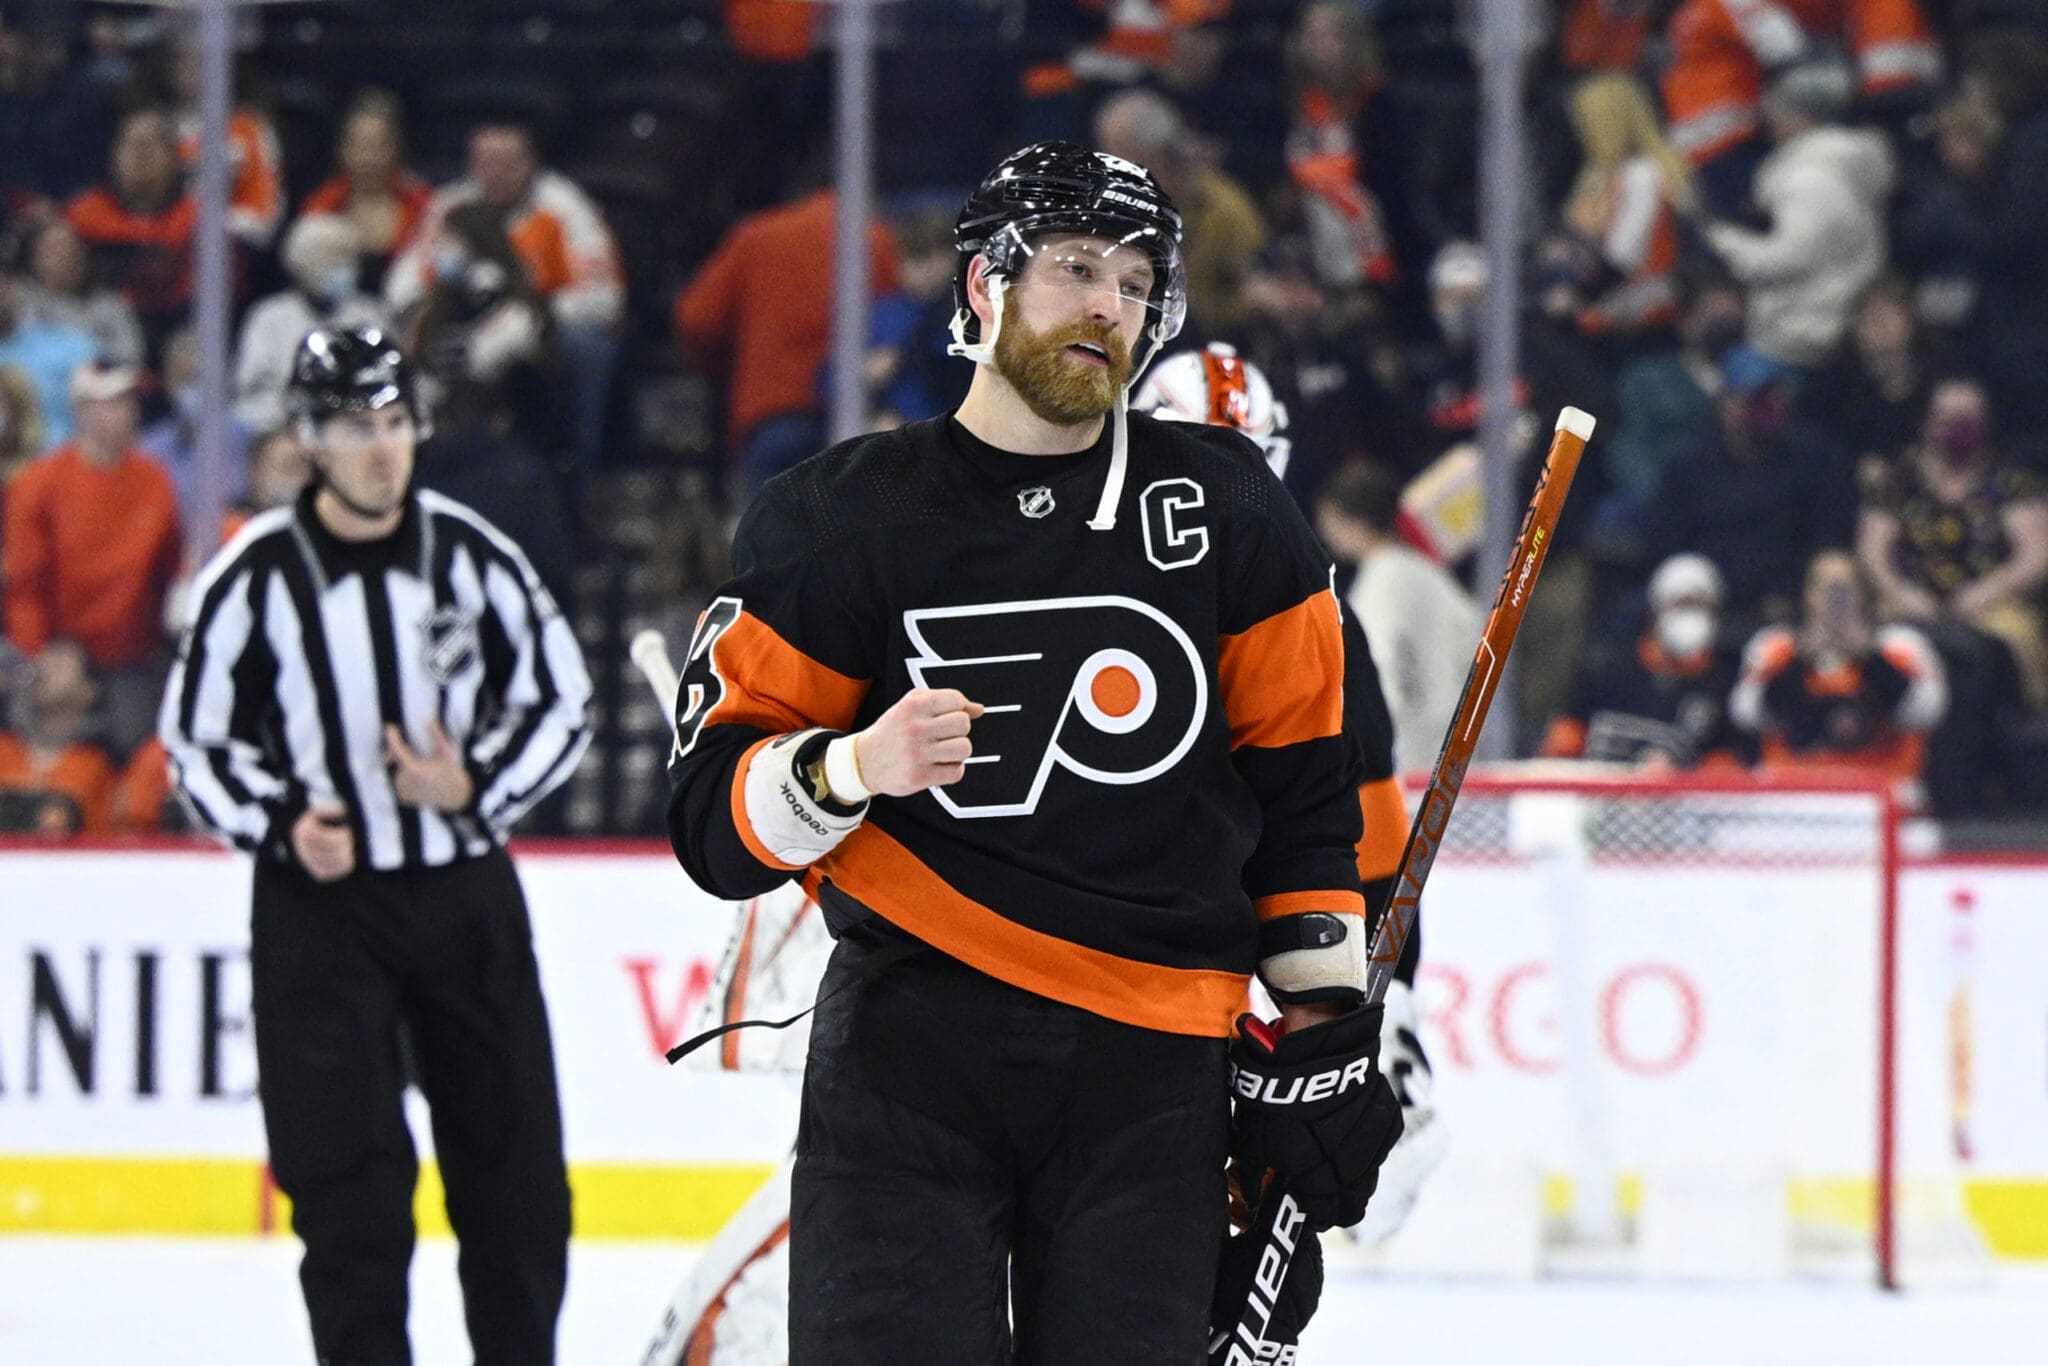 With NHL trade deadline near, Claude Giroux, Flyers have special